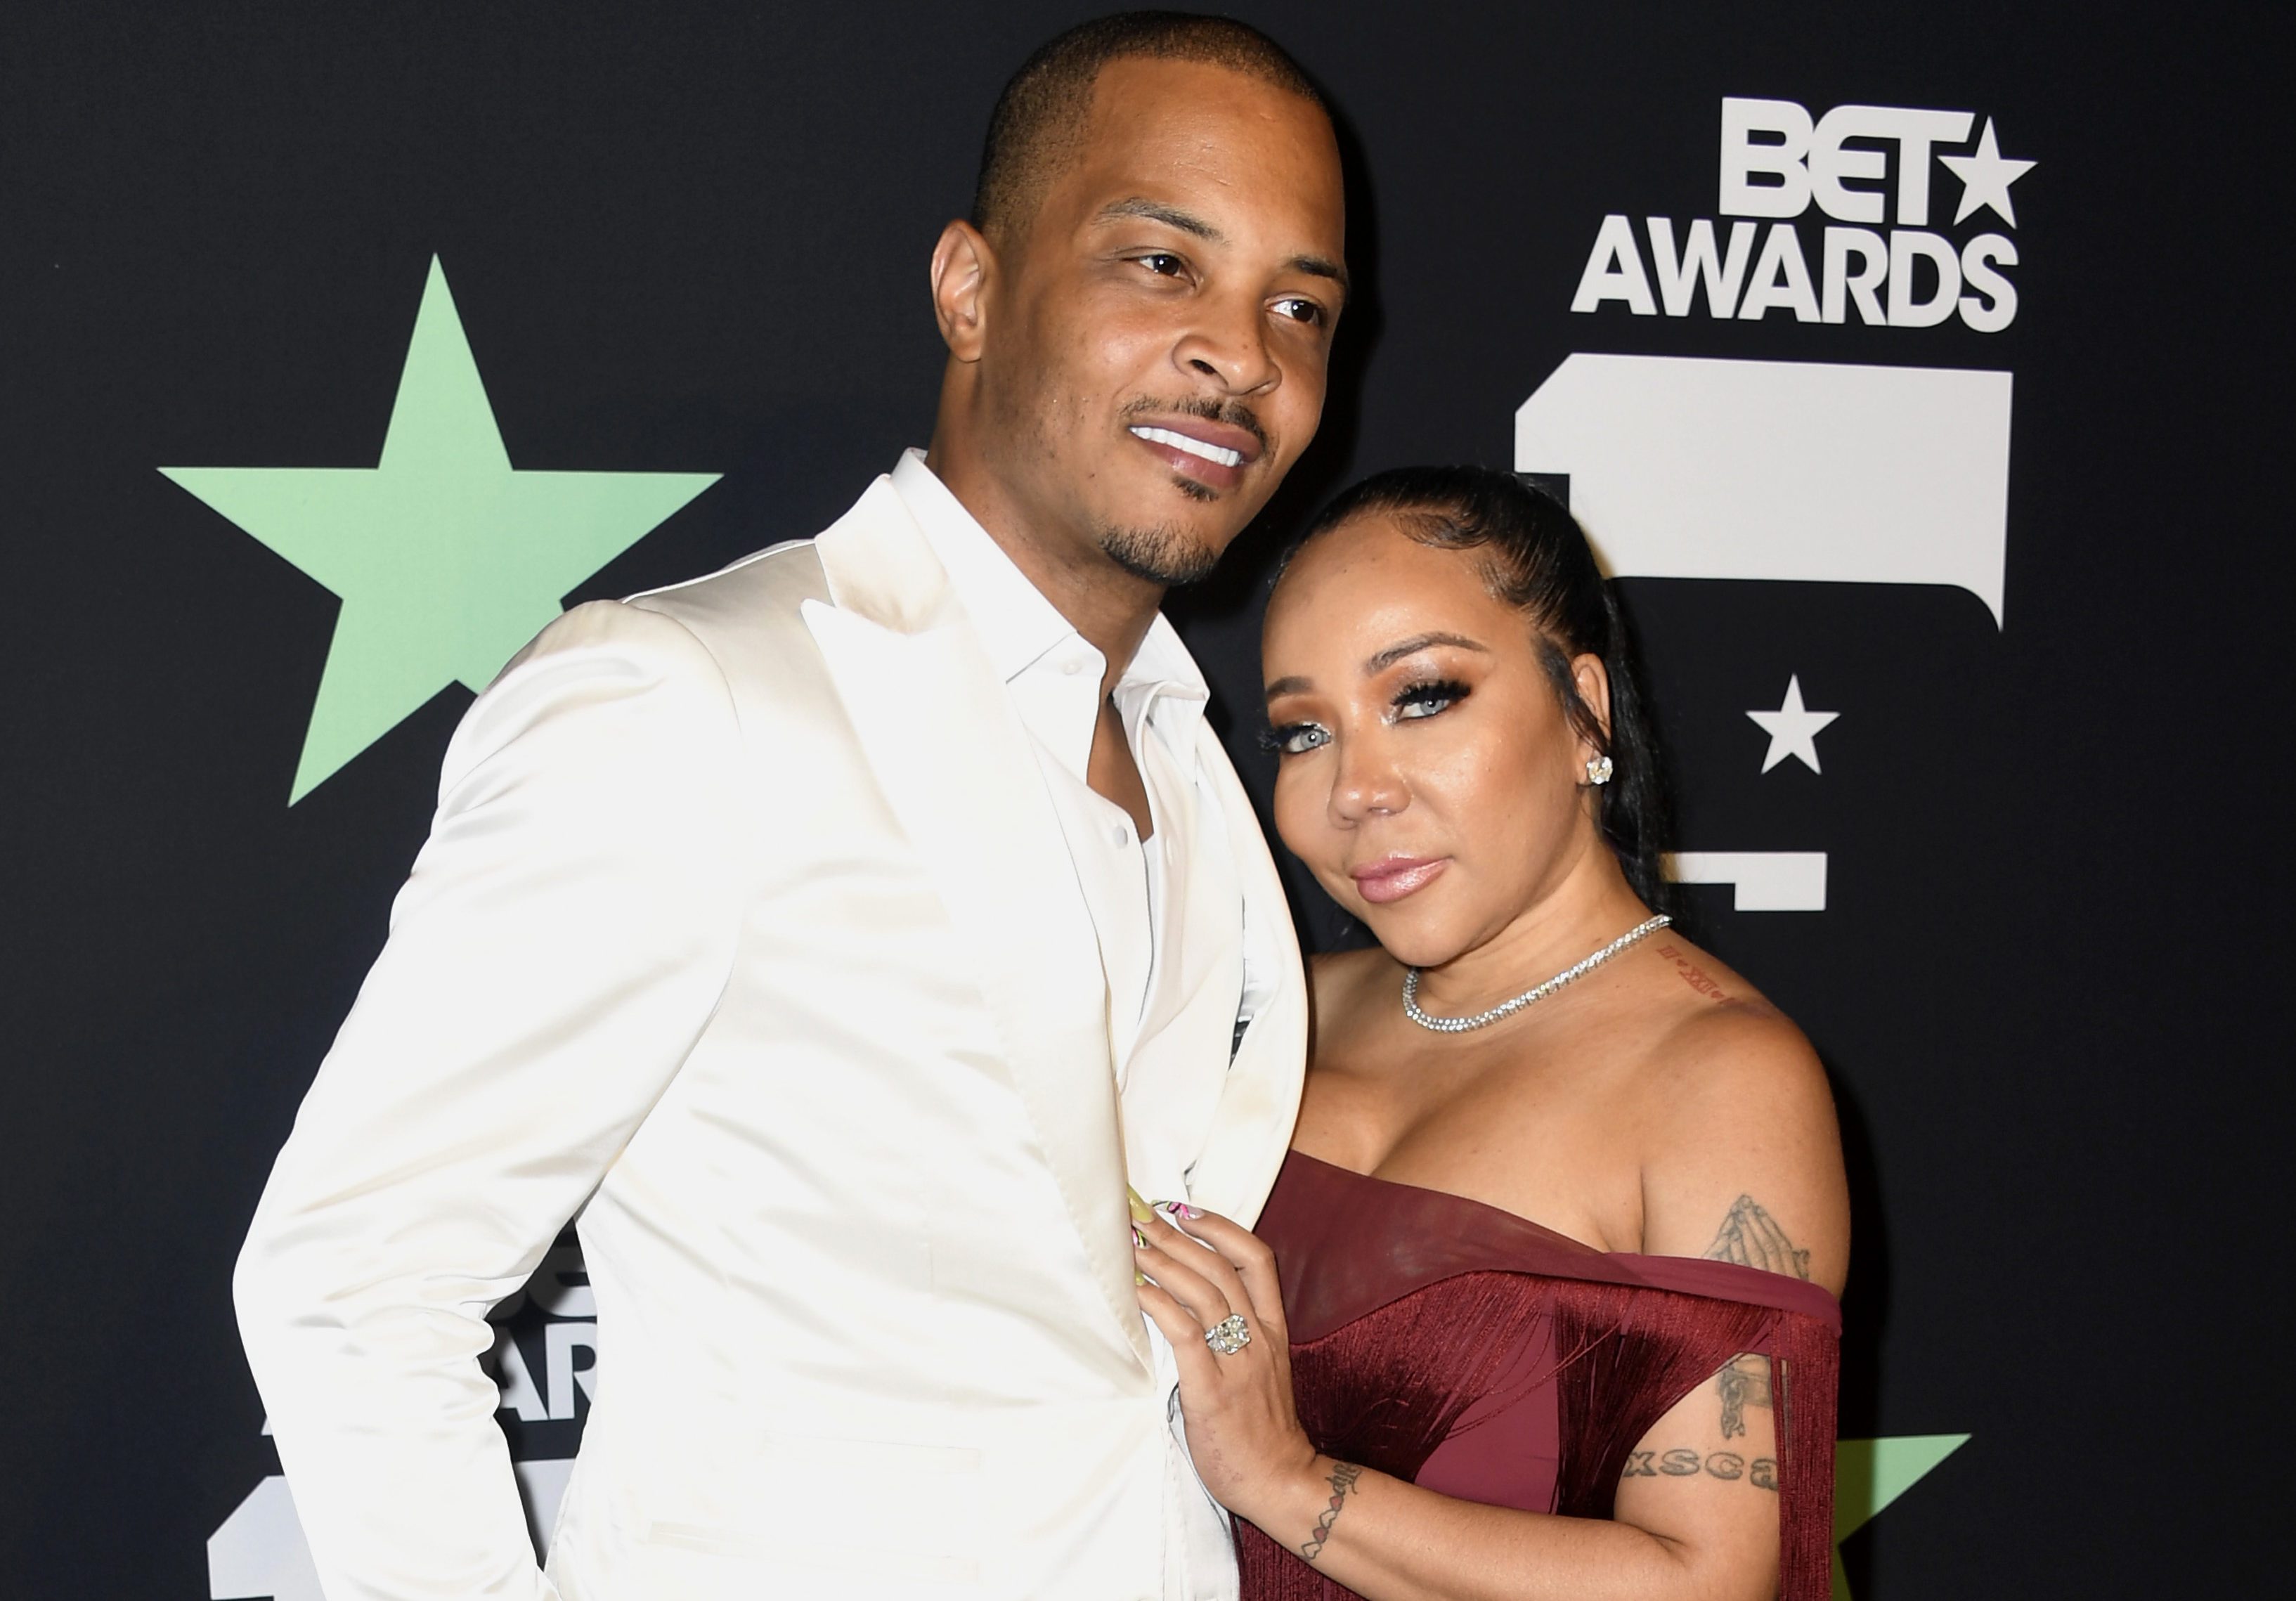 An attorney for TI and Tiny denies new allegations made by a woman in Los Angeles and says police have not contacted the couple.